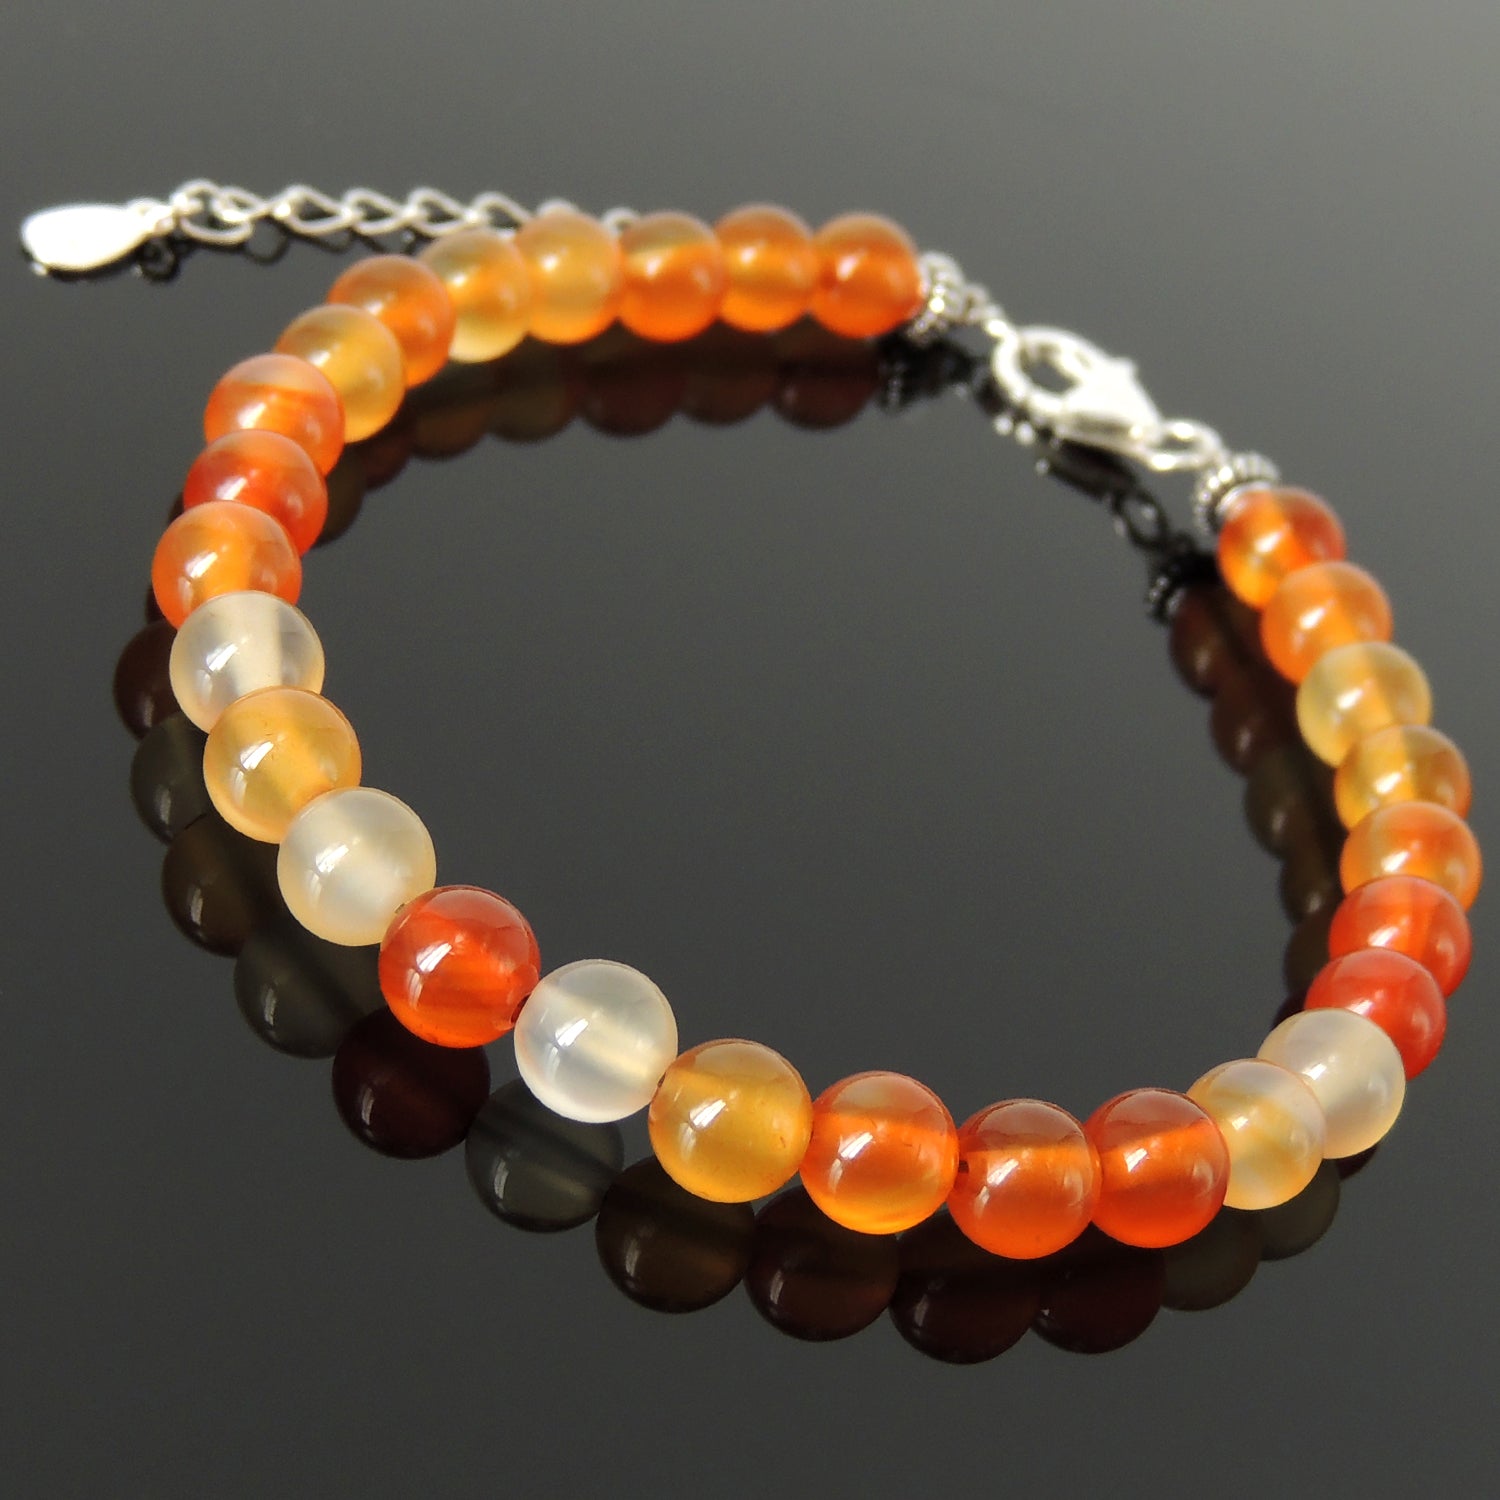 Handmade Adjustable Clasp Meditation Bracelet - Men's Women's Yoga Jewelry with 6mm Carnelian Multicolor Healing Gemstones, Genuine S925 Sterling Silver Parts (Non-Plated) BR1842